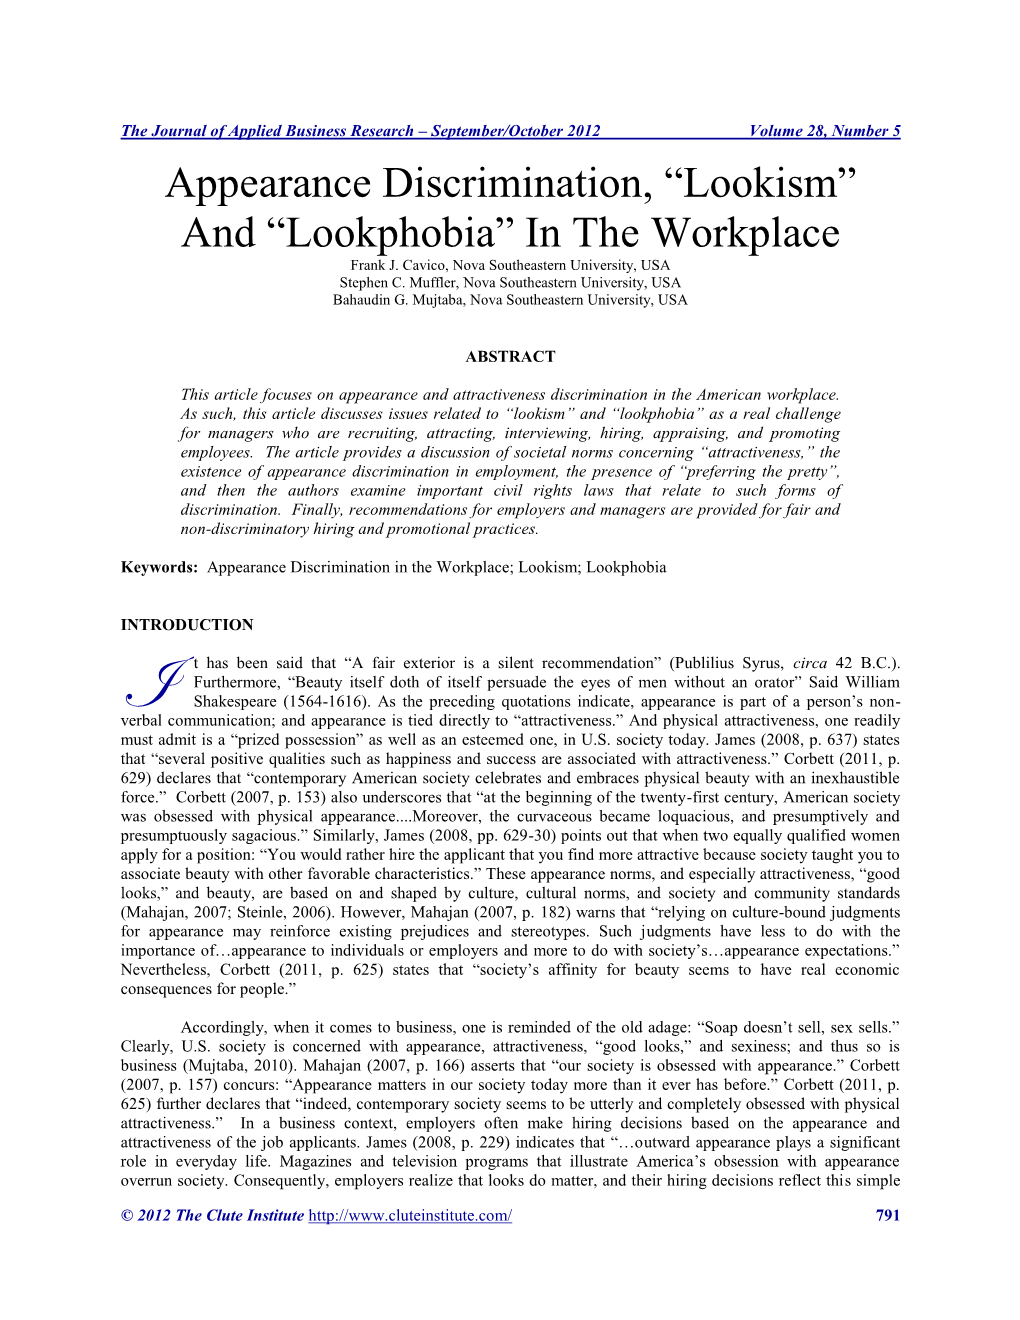 Appearance Discrimination, “Lookism” and “Lookphobia” in the Workplace Frank J